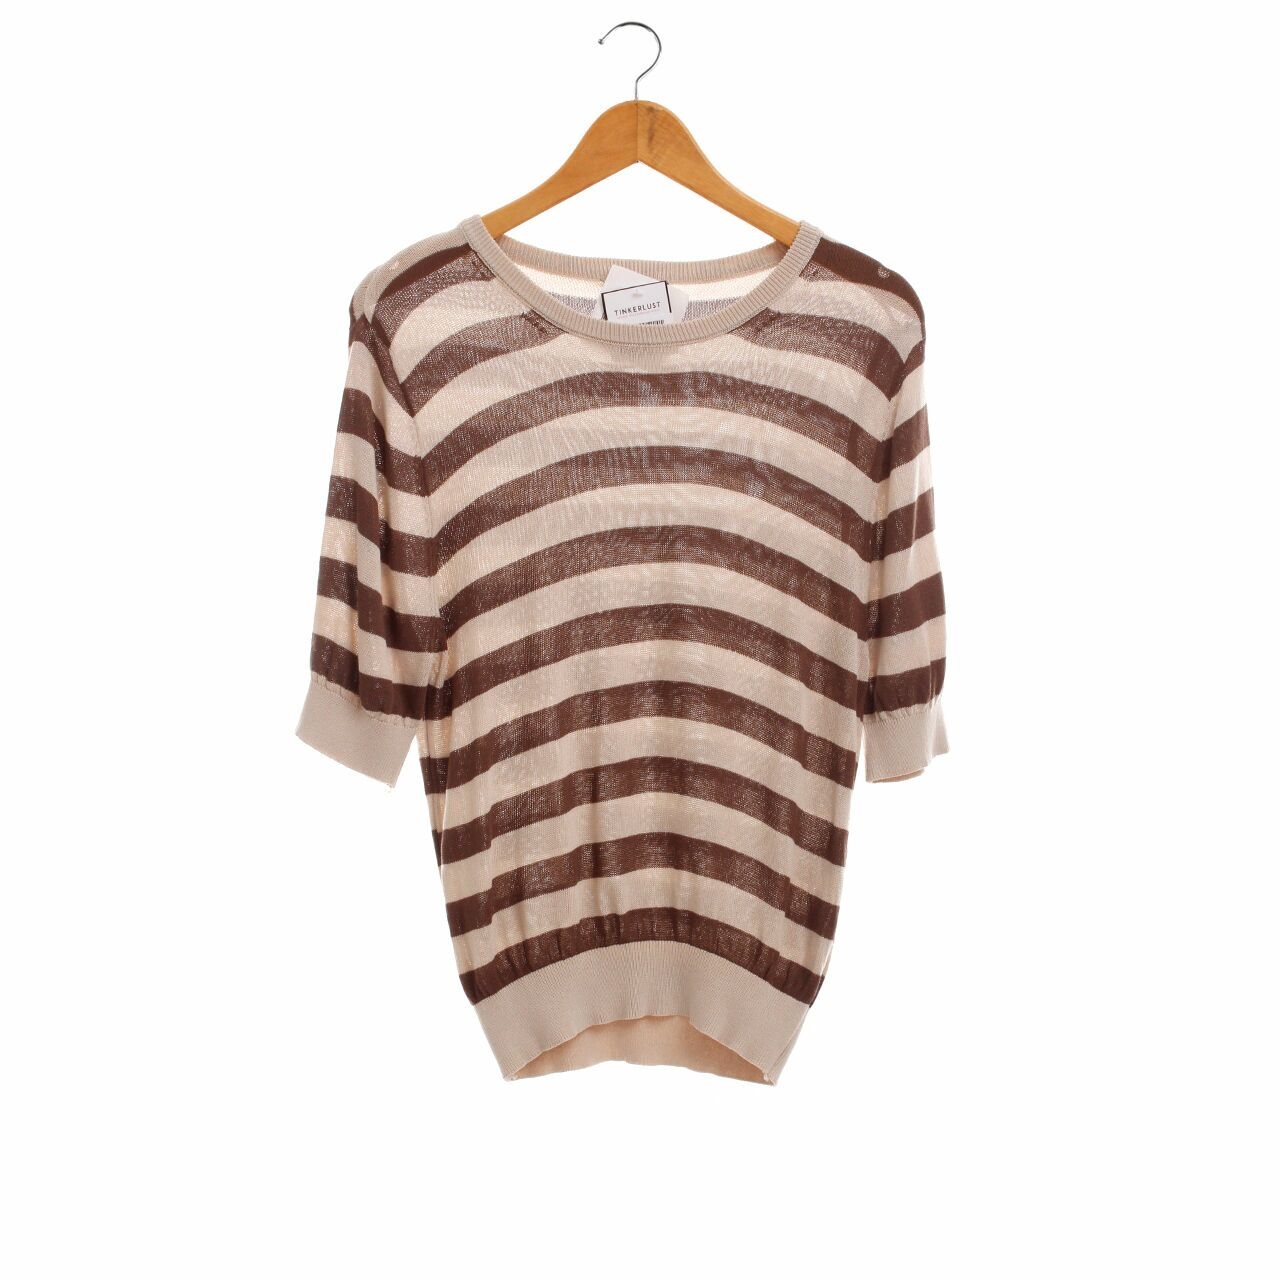 This is April Brown & Cream Stripes Knit Blouse